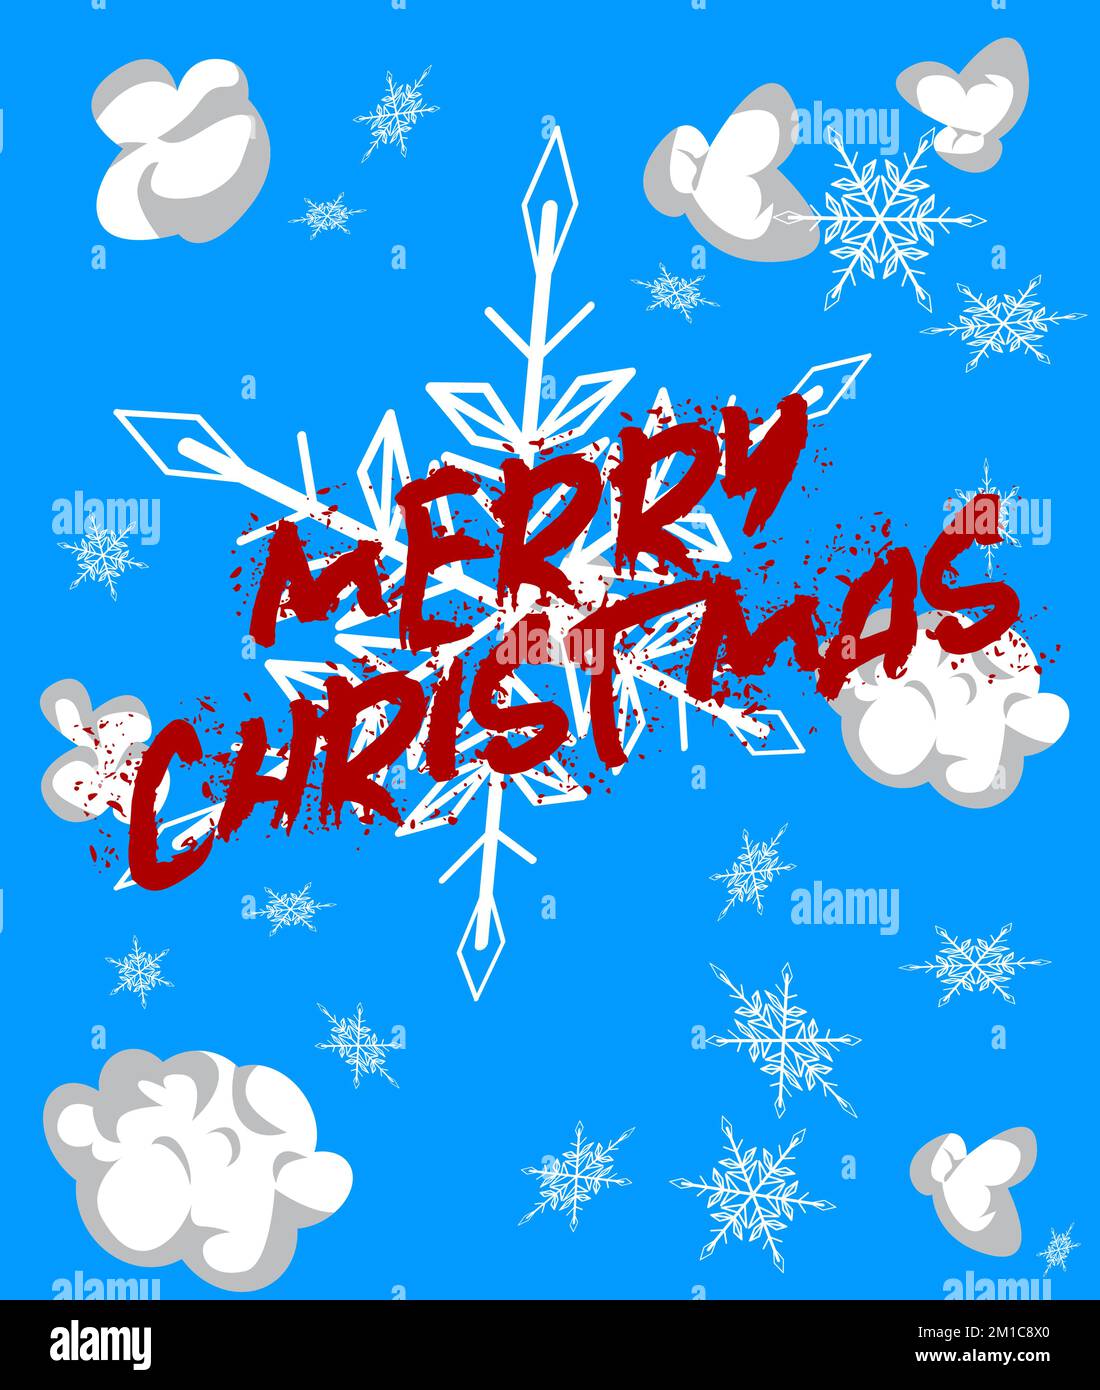 Snowflake background with Merry Christmas text. Holiday event poster, Winter, Snow, Christmas banner. Stock Vector